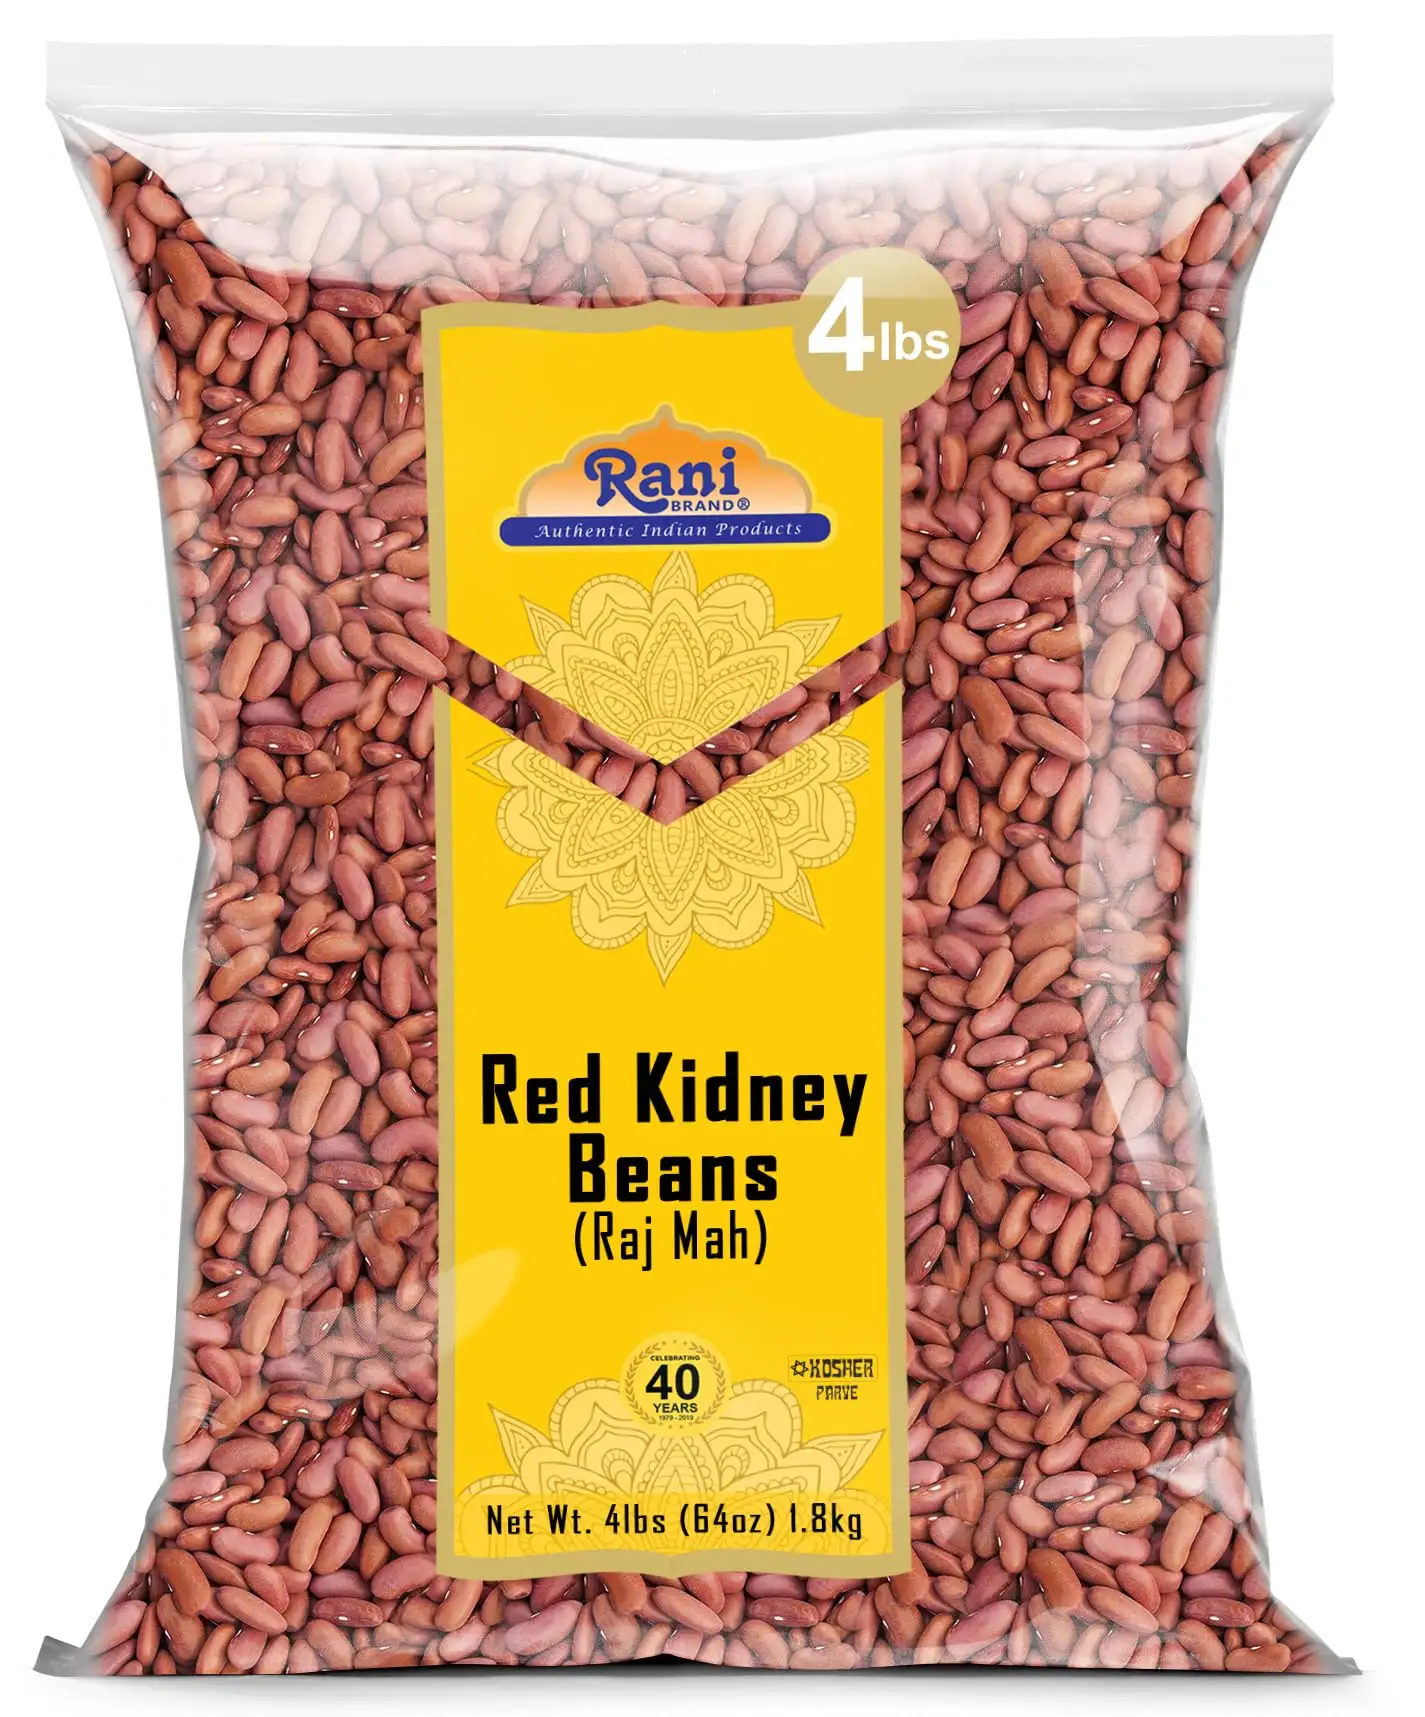 Cheap Non-GMO Red Kidney Beans and Red Beans with Wholesale Price / White Kidney Beans / Black Kidney Beans 5kg